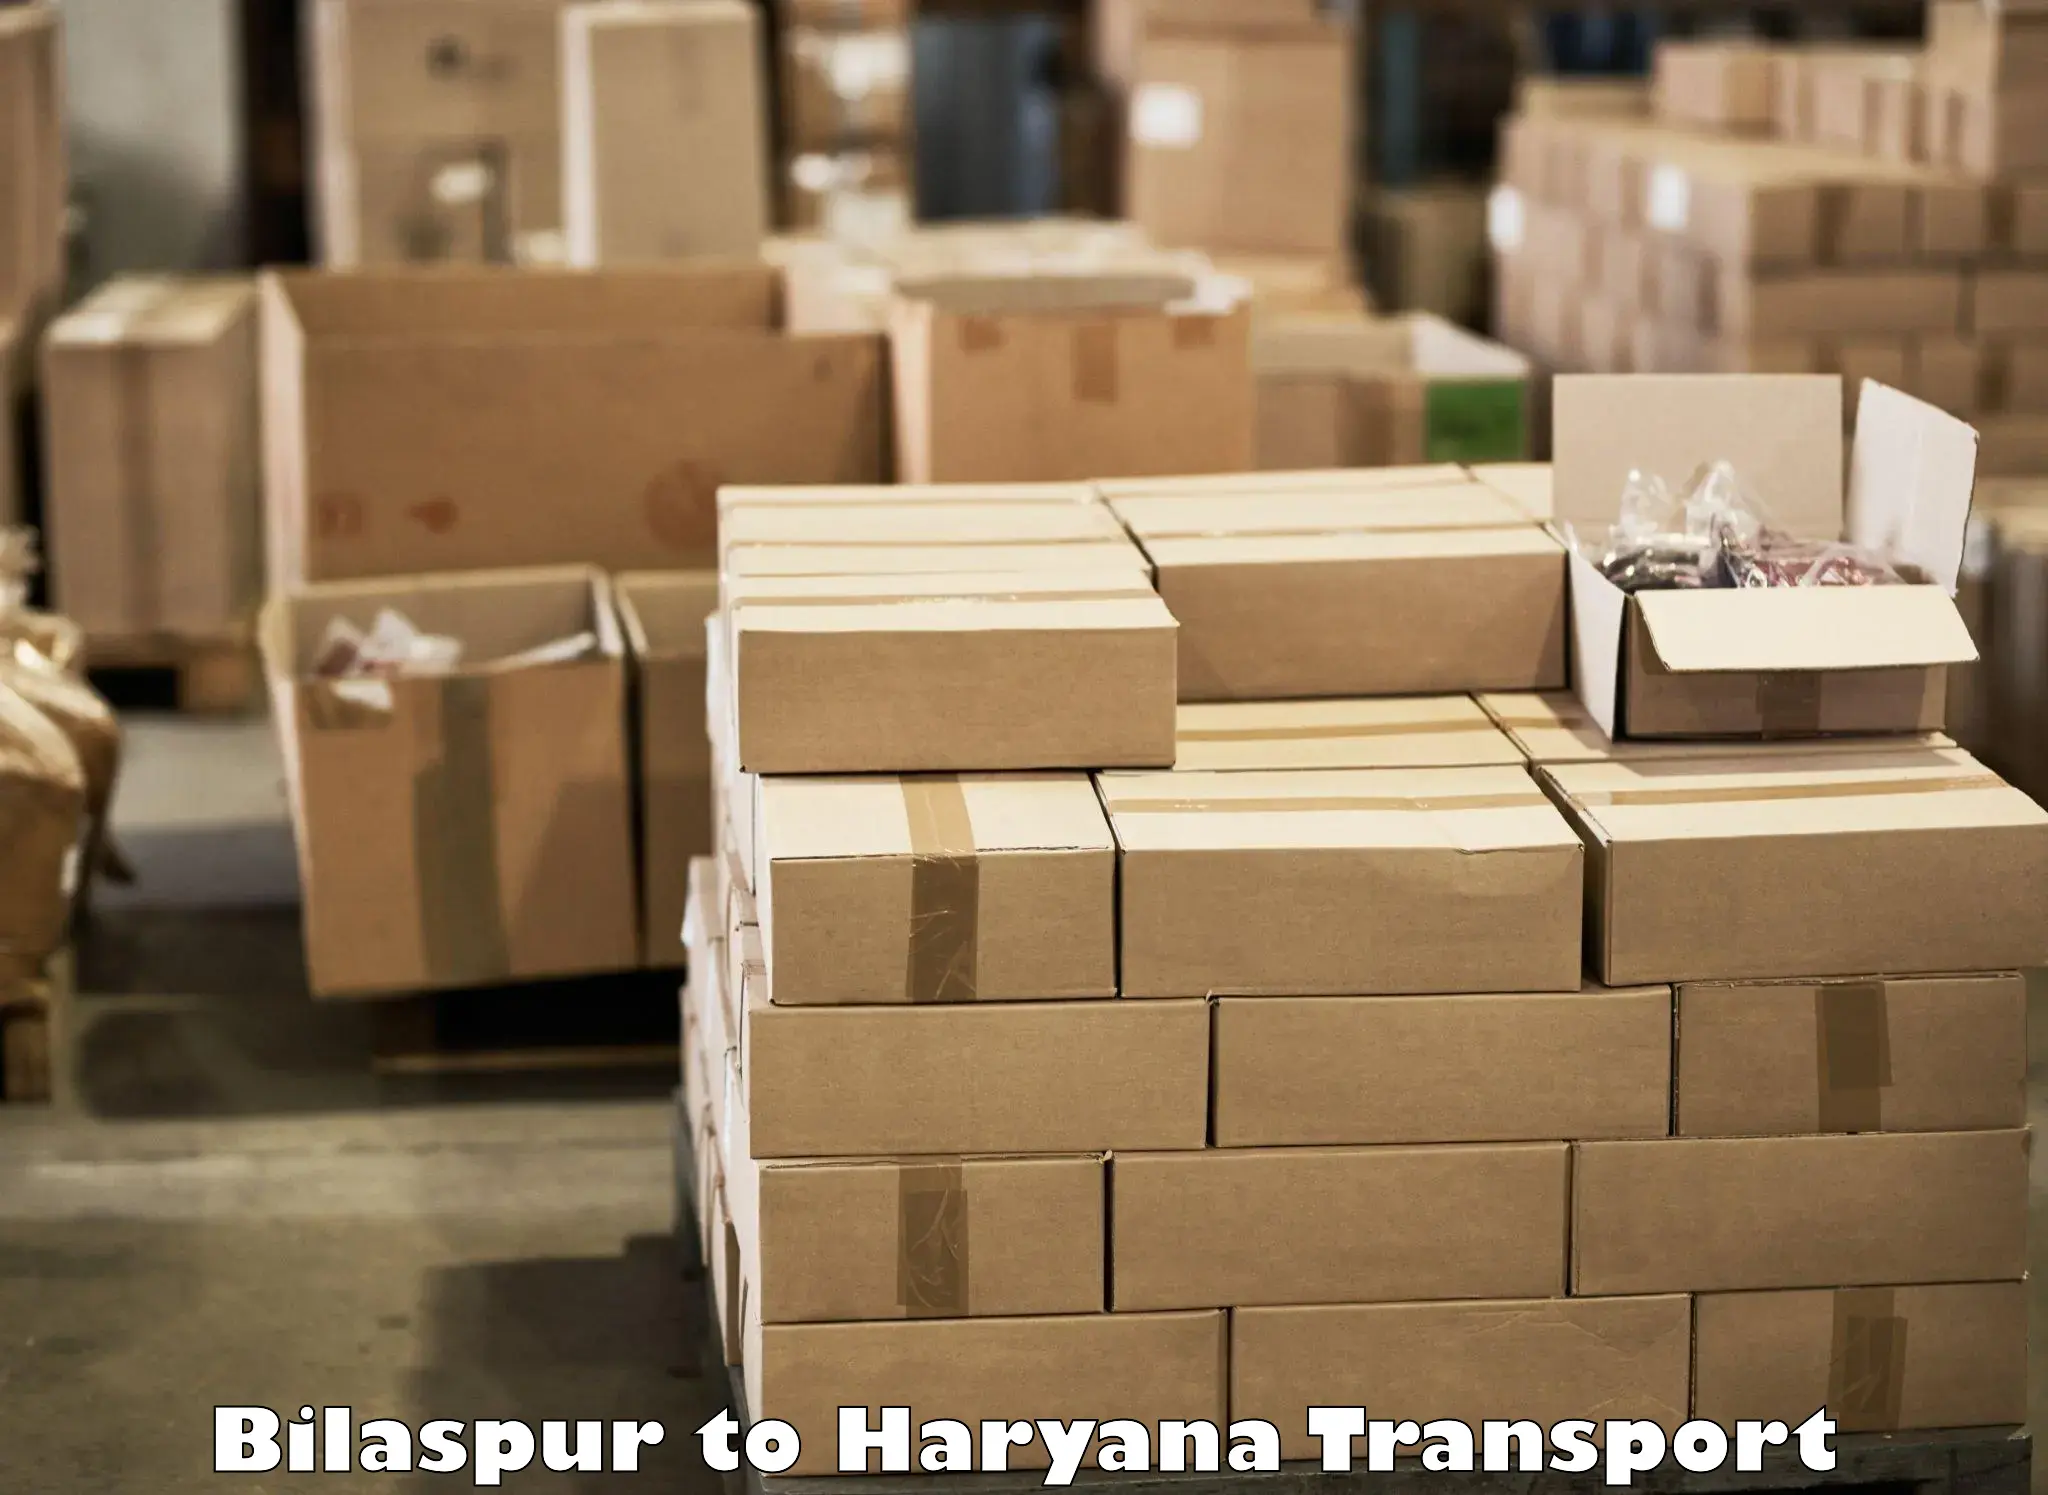 Transport shared services in Bilaspur to Bhiwani